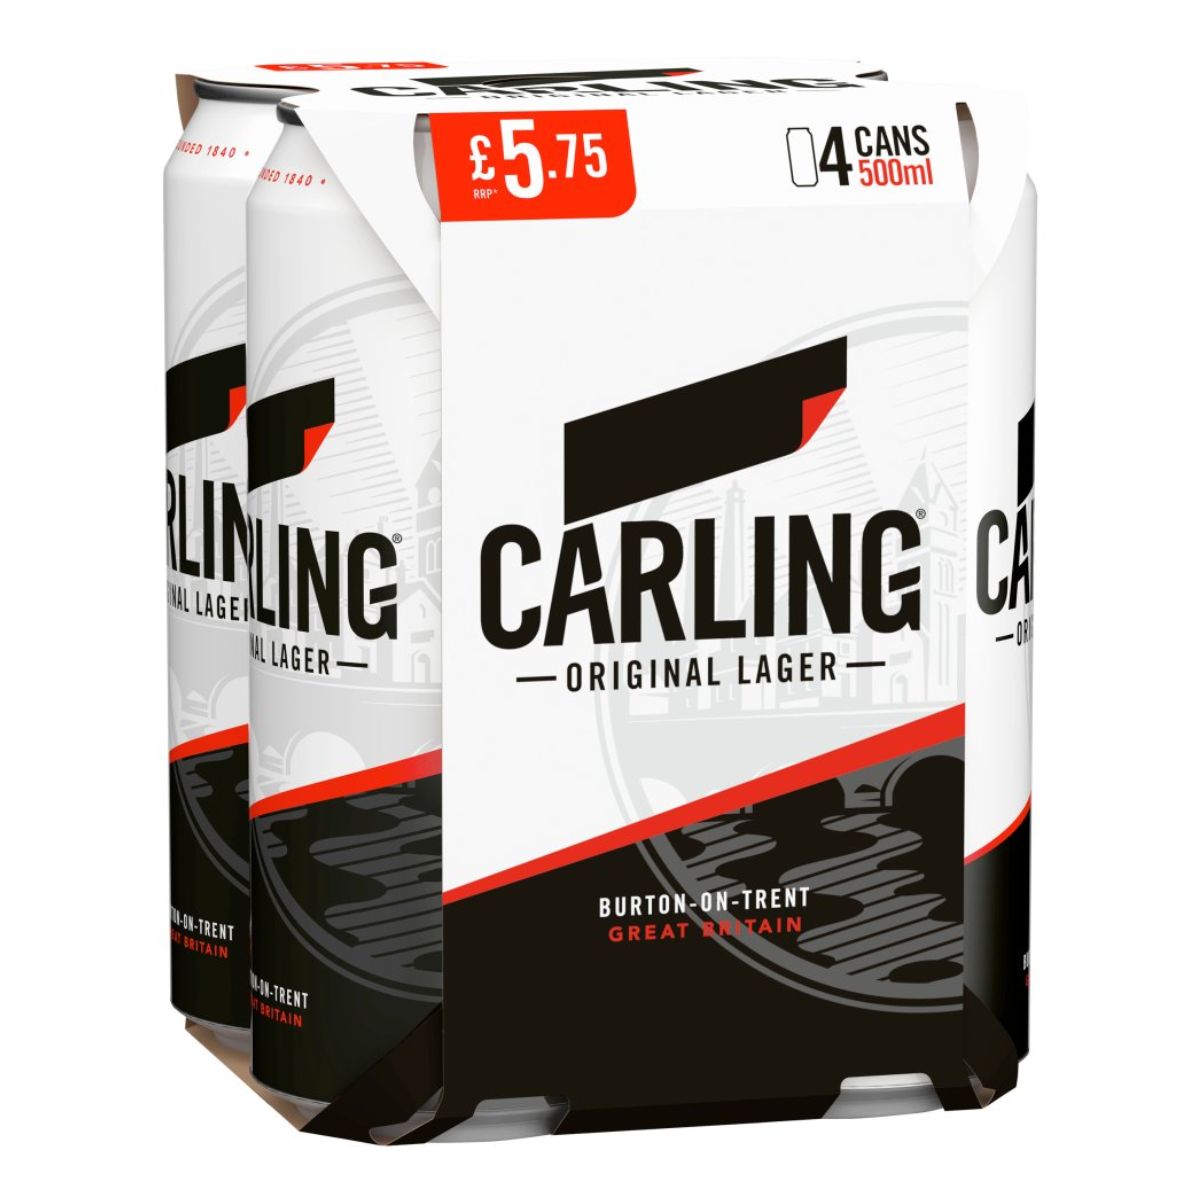 Four cans of Carling - Original Lager (4% ABV)- 4 x 500ml beer on a white background.